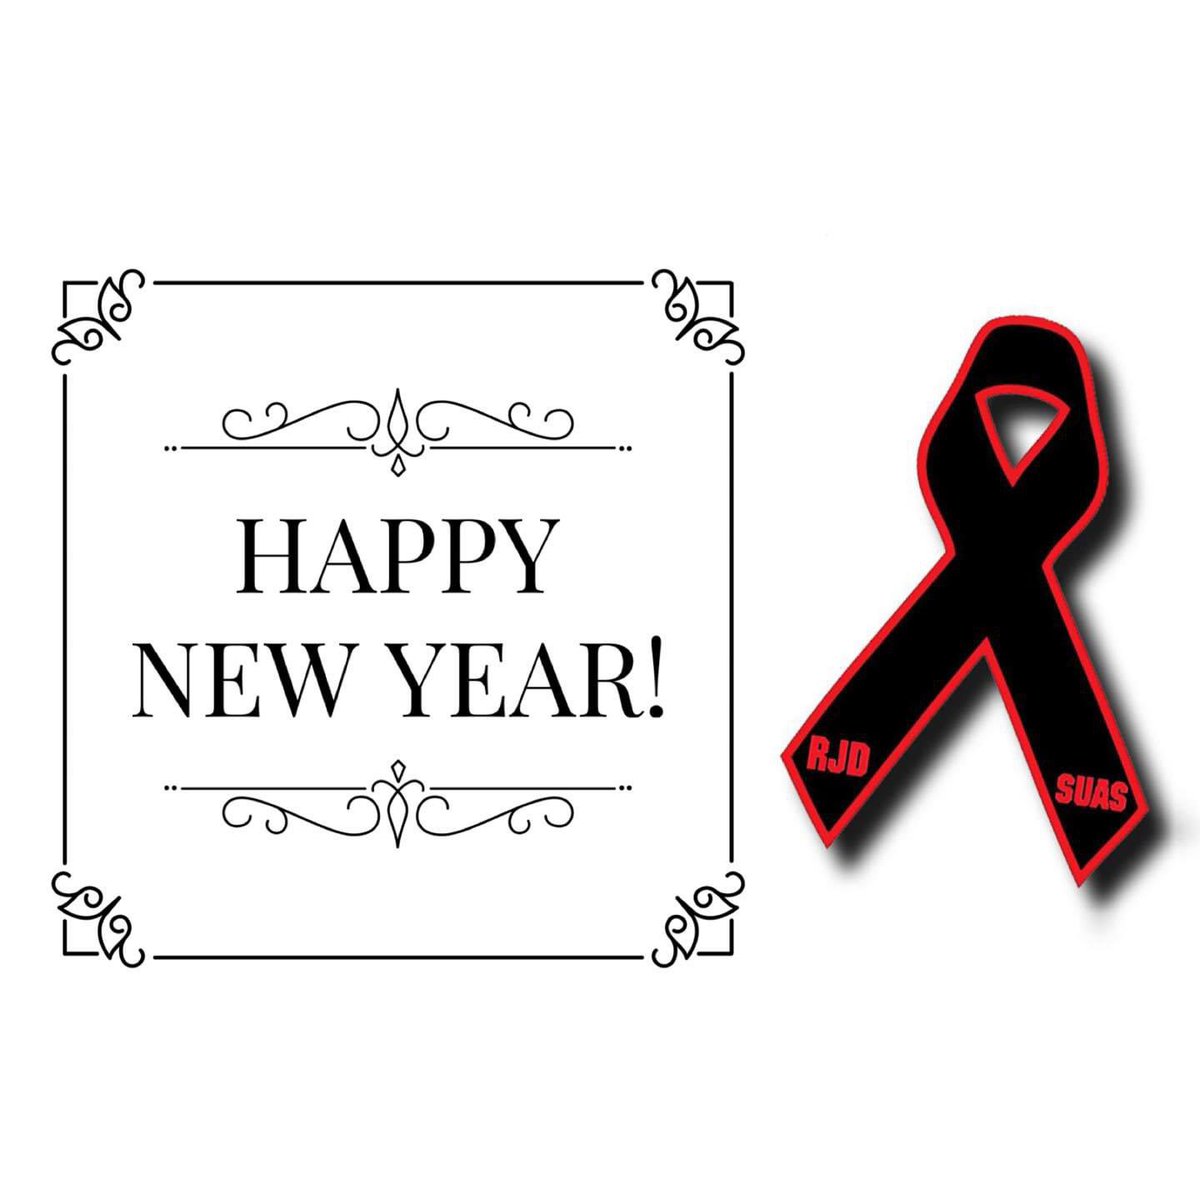 Wishing you all a very Happy New Year! From all of us at the #DioCancerFund. Let's make this a great one!